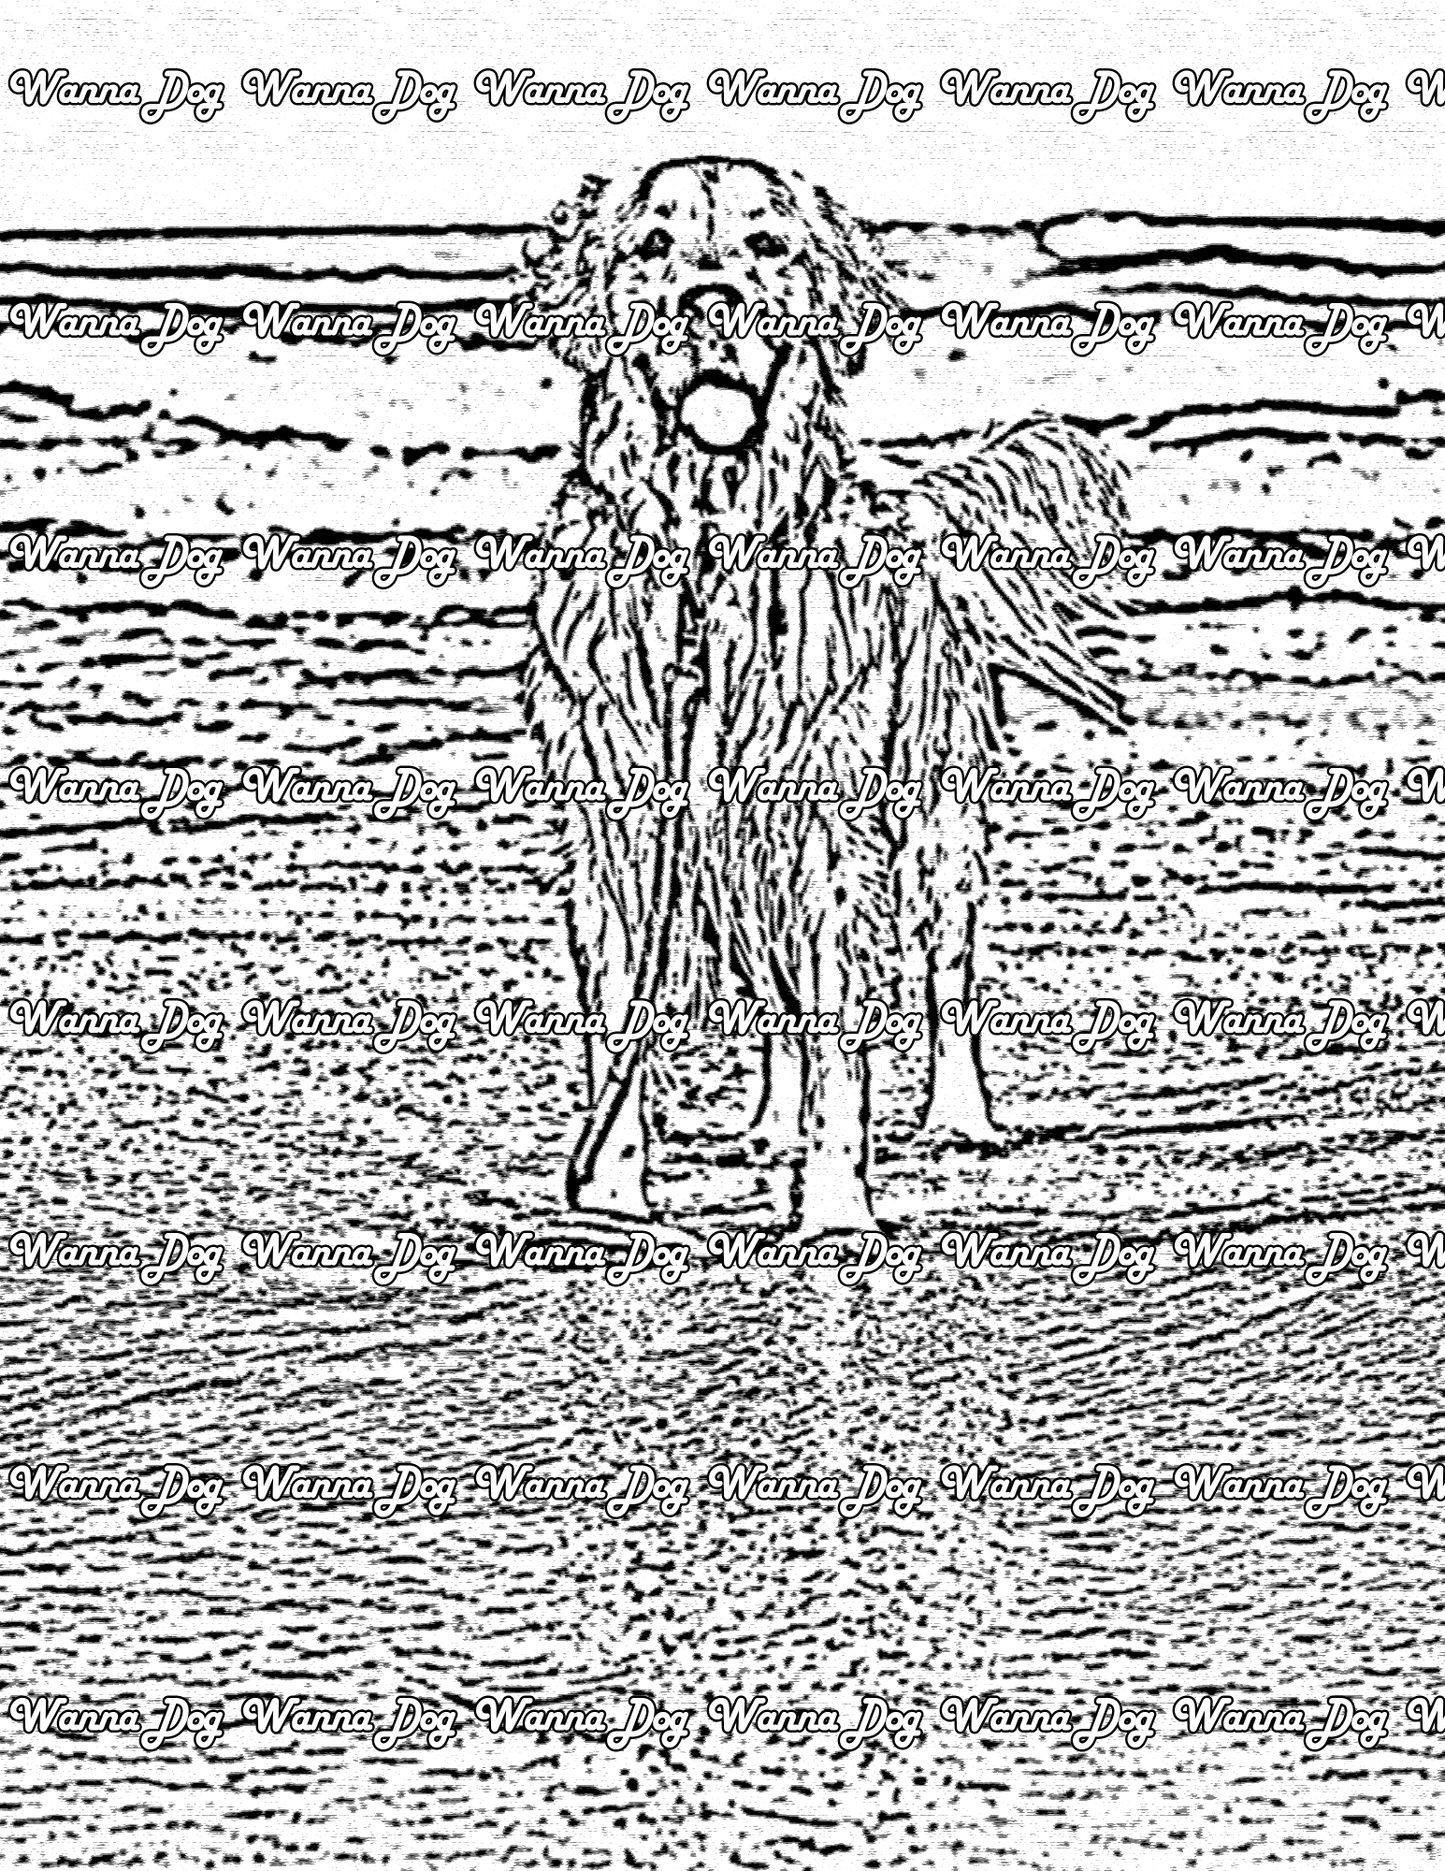 Golden Retriever Coloring Page of a Golden Retriever at the beach with waves behind them